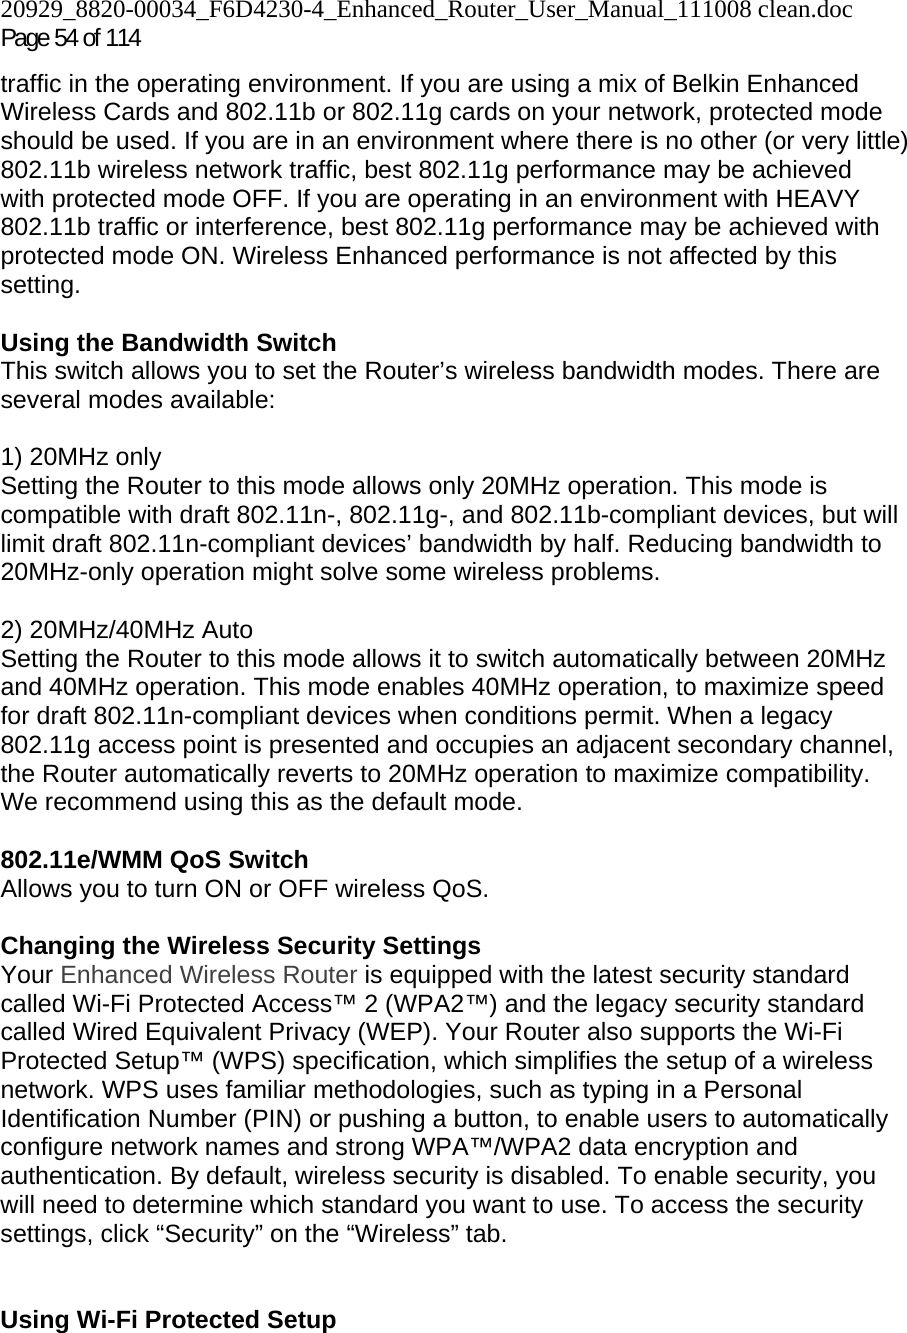 20929_8820-00034_F6D4230-4_Enhanced_Router_User_Manual_111008 clean.doc  Page 54 of 114 traffic in the operating environment. If you are using a mix of Belkin Enhanced Wireless Cards and 802.11b or 802.11g cards on your network, protected mode should be used. If you are in an environment where there is no other (or very little) 802.11b wireless network traffic, best 802.11g performance may be achieved with protected mode OFF. If you are operating in an environment with HEAVY 802.11b traffic or interference, best 802.11g performance may be achieved with protected mode ON. Wireless Enhanced performance is not affected by this setting.  Using the Bandwidth Switch This switch allows you to set the Router’s wireless bandwidth modes. There are several modes available:  1) 20MHz only Setting the Router to this mode allows only 20MHz operation. This mode is compatible with draft 802.11n-, 802.11g-, and 802.11b-compliant devices, but will limit draft 802.11n-compliant devices’ bandwidth by half. Reducing bandwidth to 20MHz-only operation might solve some wireless problems.  2) 20MHz/40MHz Auto Setting the Router to this mode allows it to switch automatically between 20MHz and 40MHz operation. This mode enables 40MHz operation, to maximize speed for draft 802.11n-compliant devices when conditions permit. When a legacy 802.11g access point is presented and occupies an adjacent secondary channel, the Router automatically reverts to 20MHz operation to maximize compatibility. We recommend using this as the default mode.  802.11e/WMM QoS Switch Allows you to turn ON or OFF wireless QoS.  Changing the Wireless Security Settings Your Enhanced Wireless Router is equipped with the latest security standard called Wi-Fi Protected Access™ 2 (WPA2™) and the legacy security standard called Wired Equivalent Privacy (WEP). Your Router also supports the Wi-Fi Protected Setup™ (WPS) specification, which simplifies the setup of a wireless network. WPS uses familiar methodologies, such as typing in a Personal Identification Number (PIN) or pushing a button, to enable users to automatically configure network names and strong WPA™/WPA2 data encryption and authentication. By default, wireless security is disabled. To enable security, you will need to determine which standard you want to use. To access the security settings, click “Security” on the “Wireless” tab.   Using Wi-Fi Protected Setup  